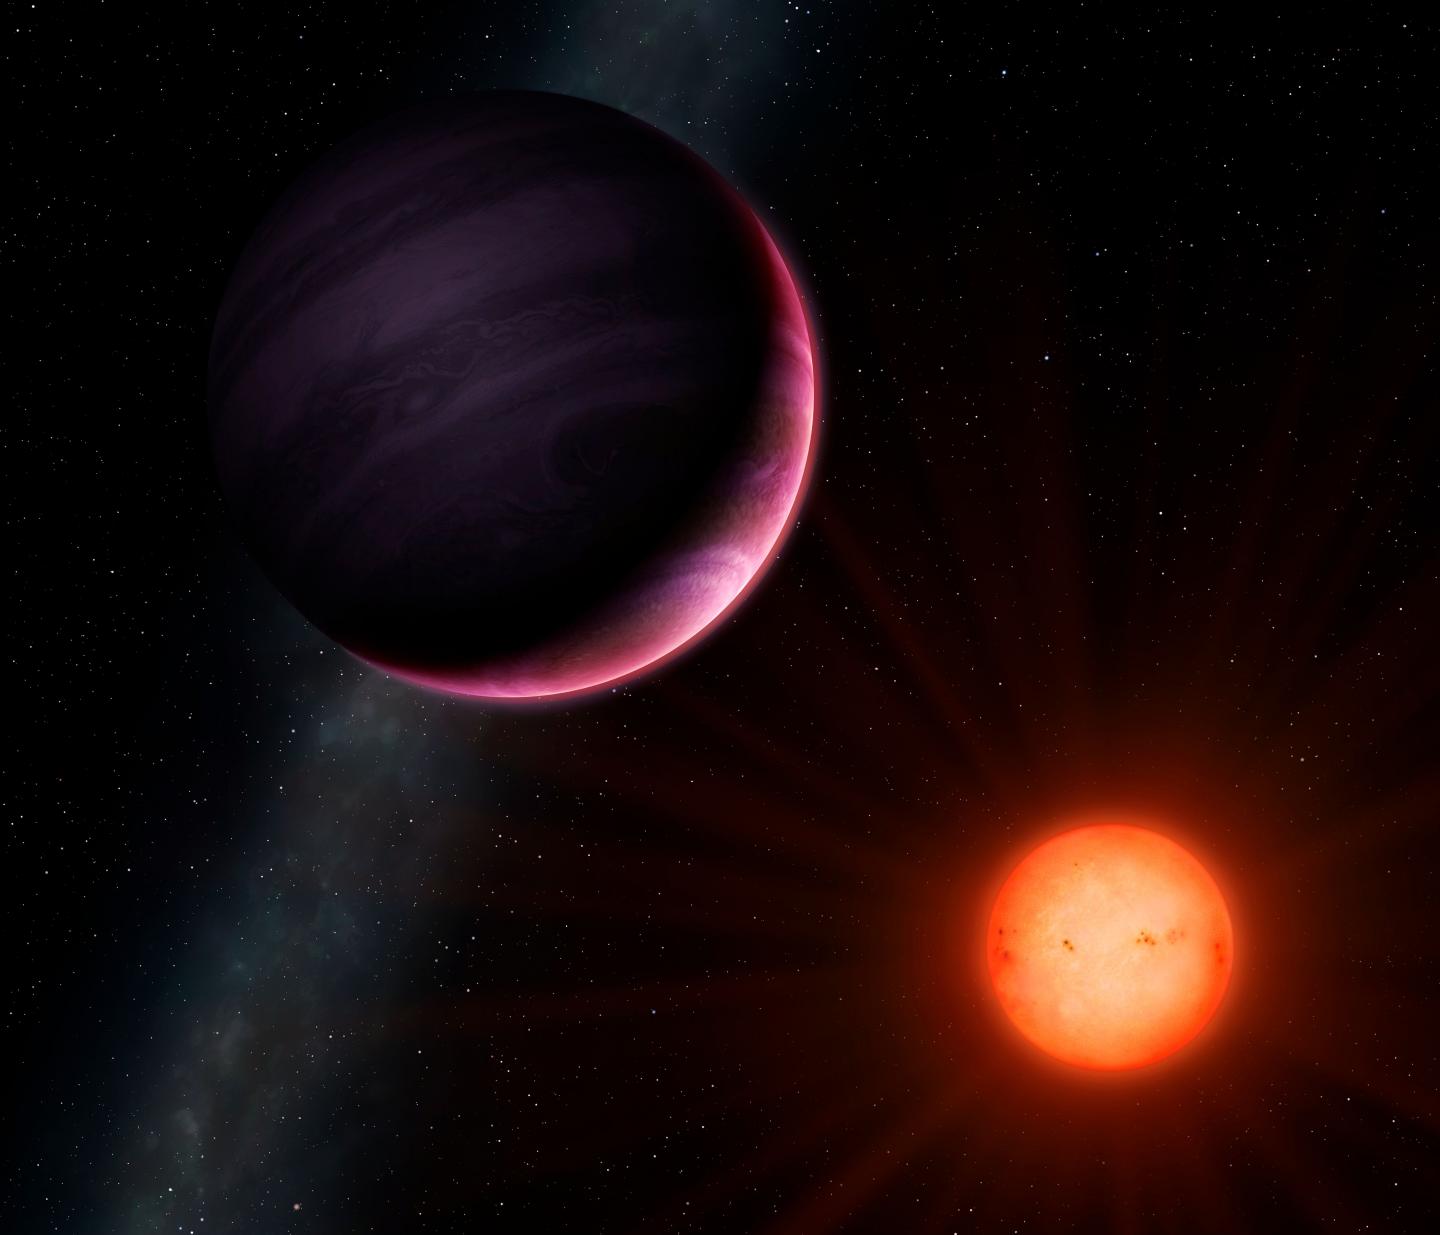 Cool Red Star and Gas-giant Planet Ngts-1b Against the Milky Way